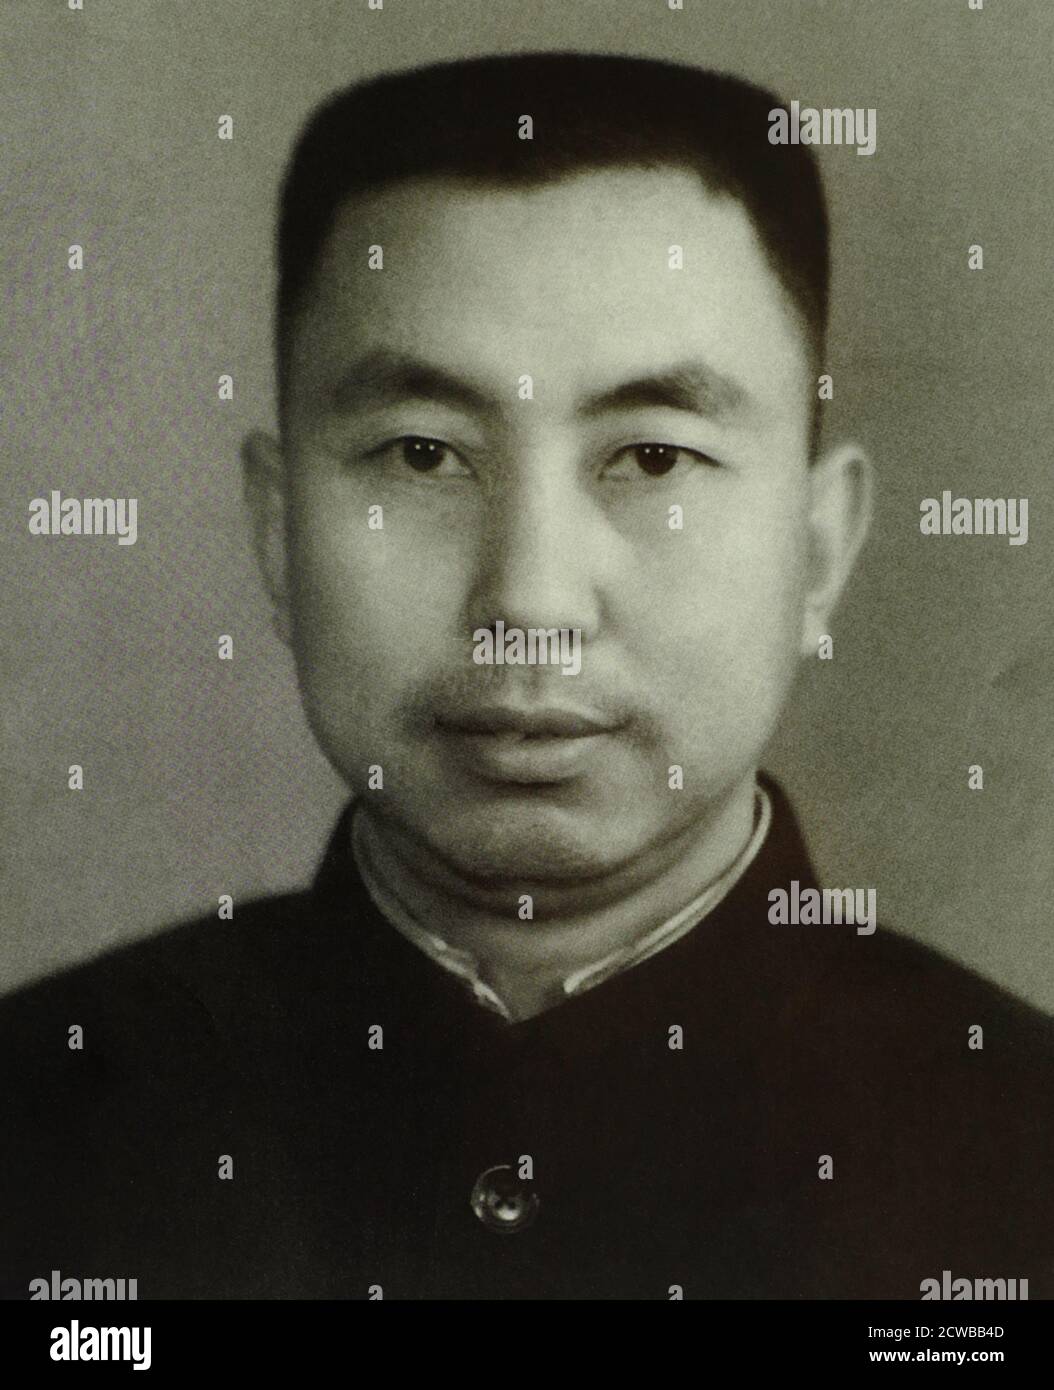 Hua Guofeng (1921 - 2008) in 1957. Chinese politician who served as Chairman of the Communist Party of China and Premier of the People's Republic of China, 1976 - 1981. In 1952, he was appointed secretary of Xiangtan Special District, which included Mao's hometown, Shaoshan. In this role, he built a memorial hall dedicated to Mao. When Mao visited the site, in June 1959, he was favourably impressed Stock Photo